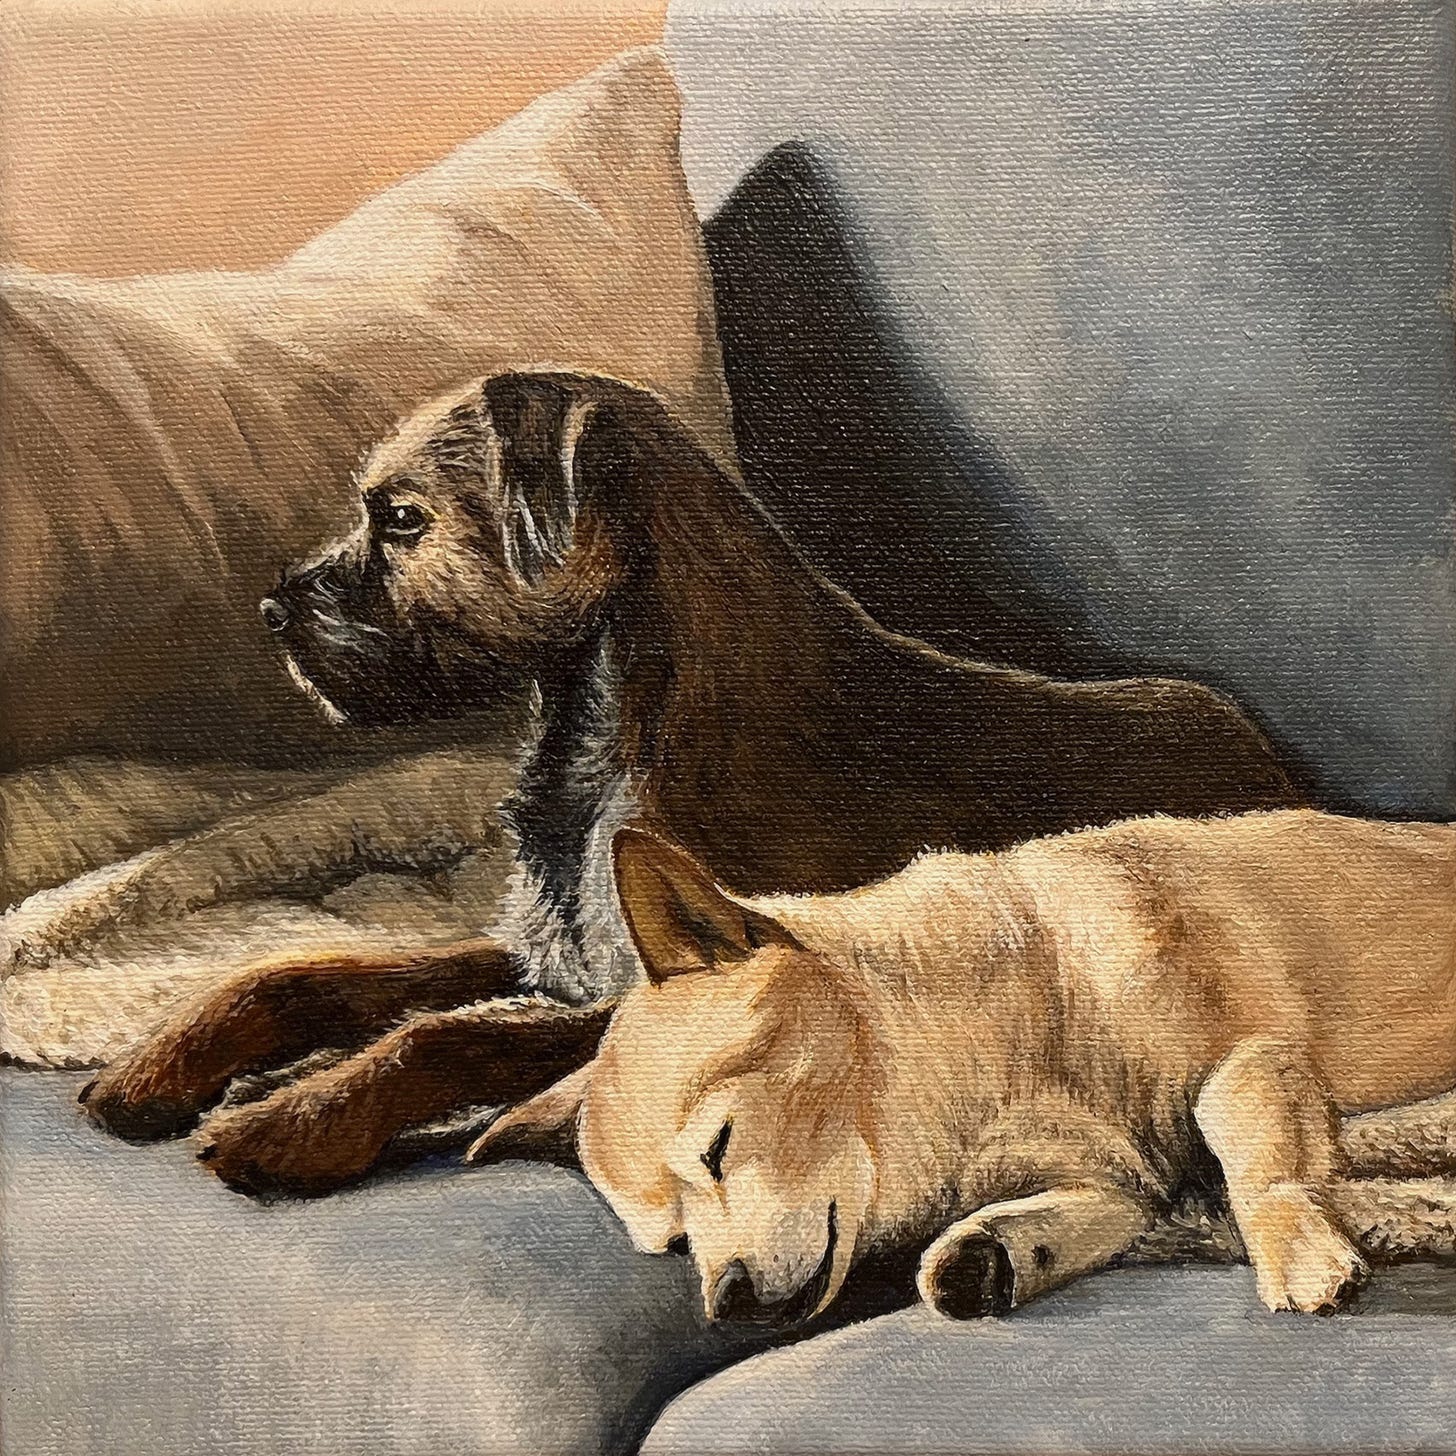 Painting of our two dogs, Lucy and Lola, as they lie together on a fuzzy blanket on our light blue-grey sofa. Lucy, a brown and black Border Terrier, gazes alertly off into the distance while Lola, the golden pomeranian mix, lies fast asleep beside her.